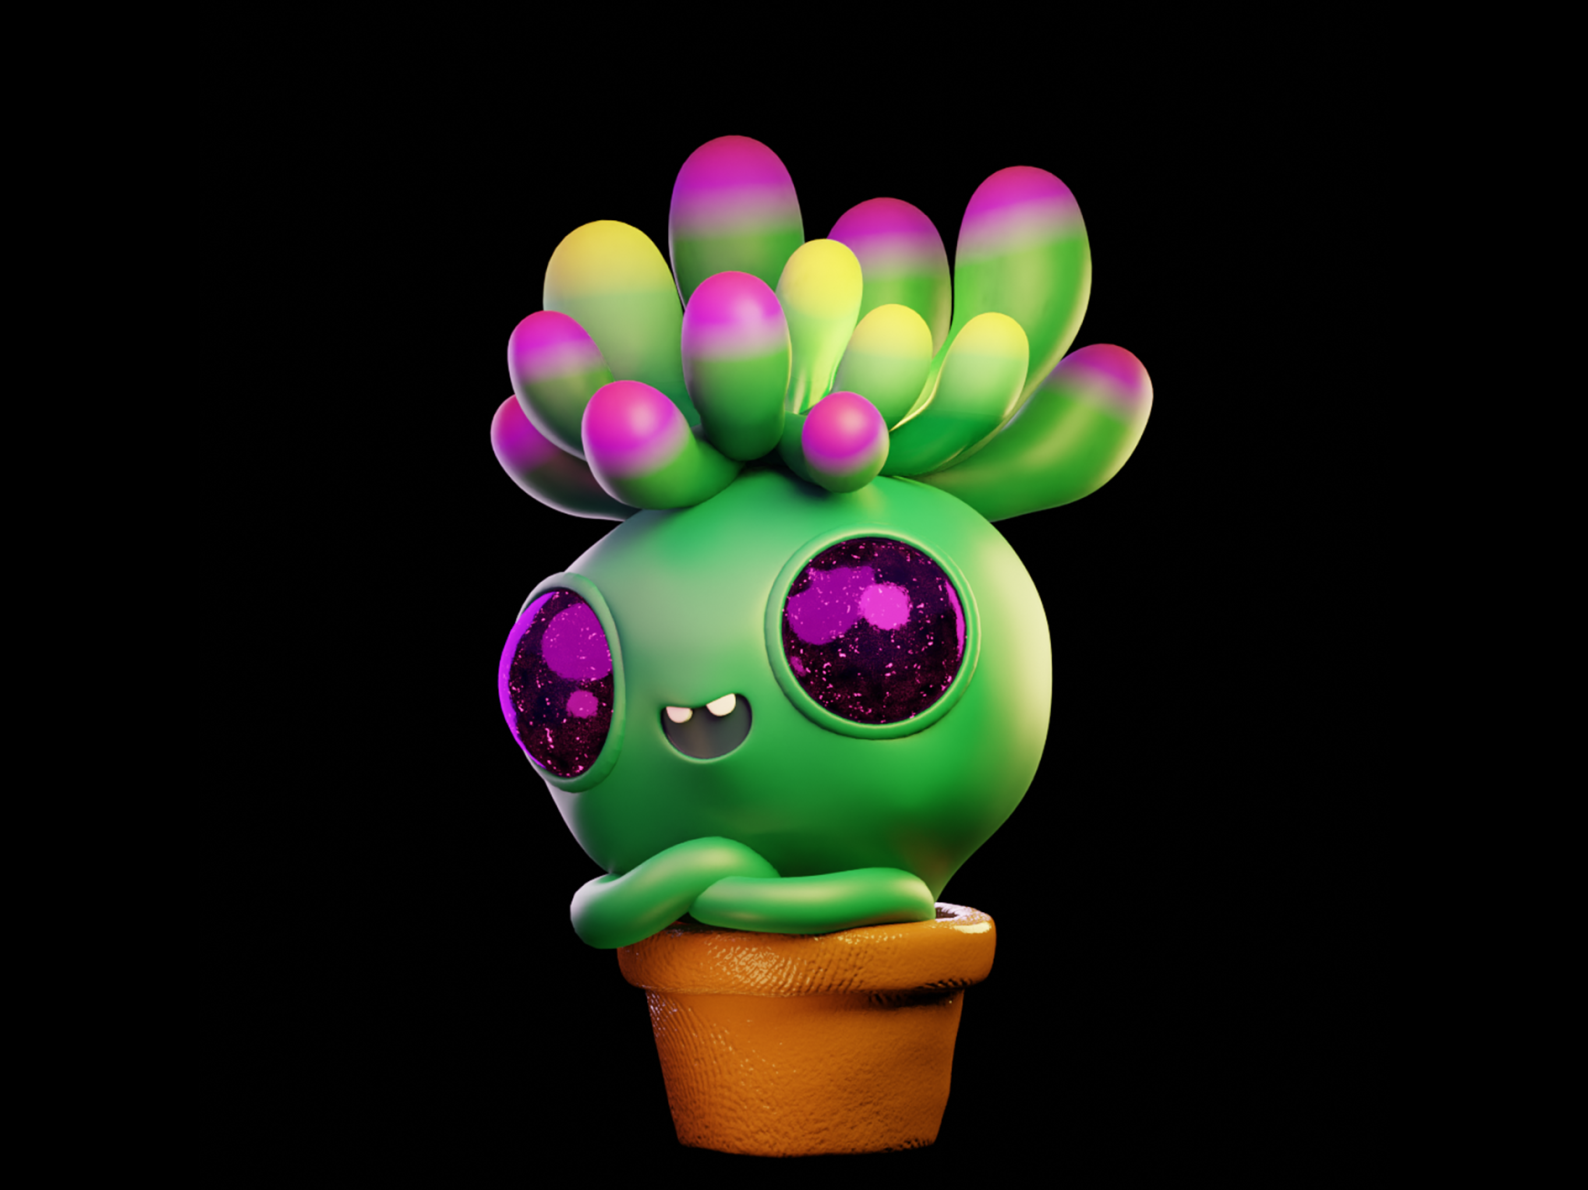 Mysterious Plant by Grace_A on Dribbble